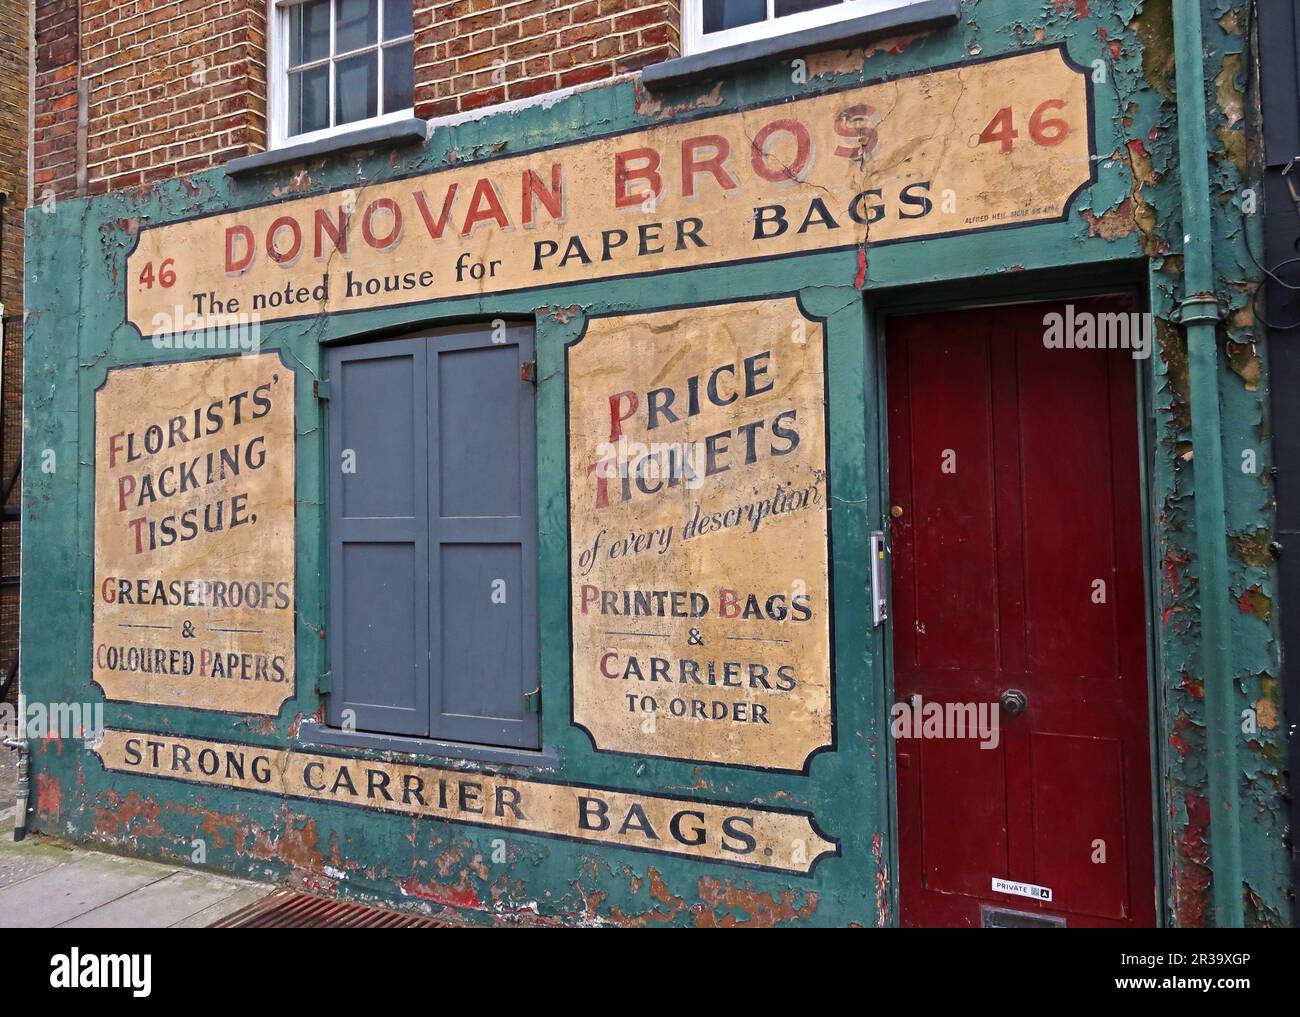 Donovan Bros Victorian business with ghost sign, Paper Bag suppliers - 46 Crispin St, London E1 6HQ Stock Photo